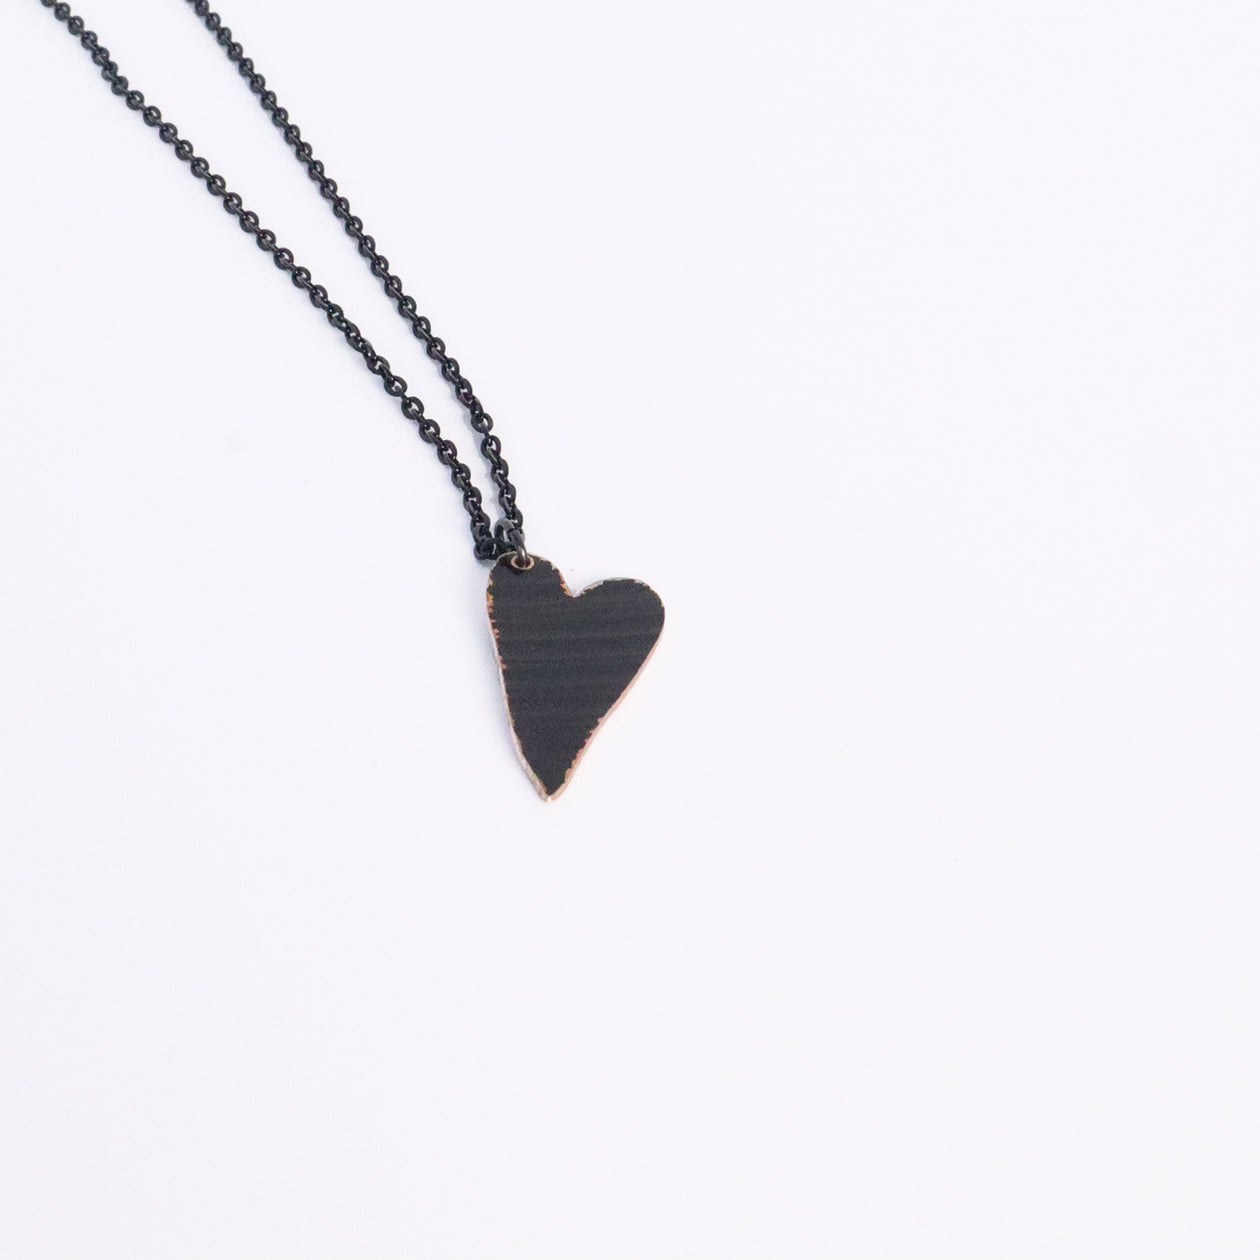 Imperfect Heart Black - Reclaimed Cymbal Necklace